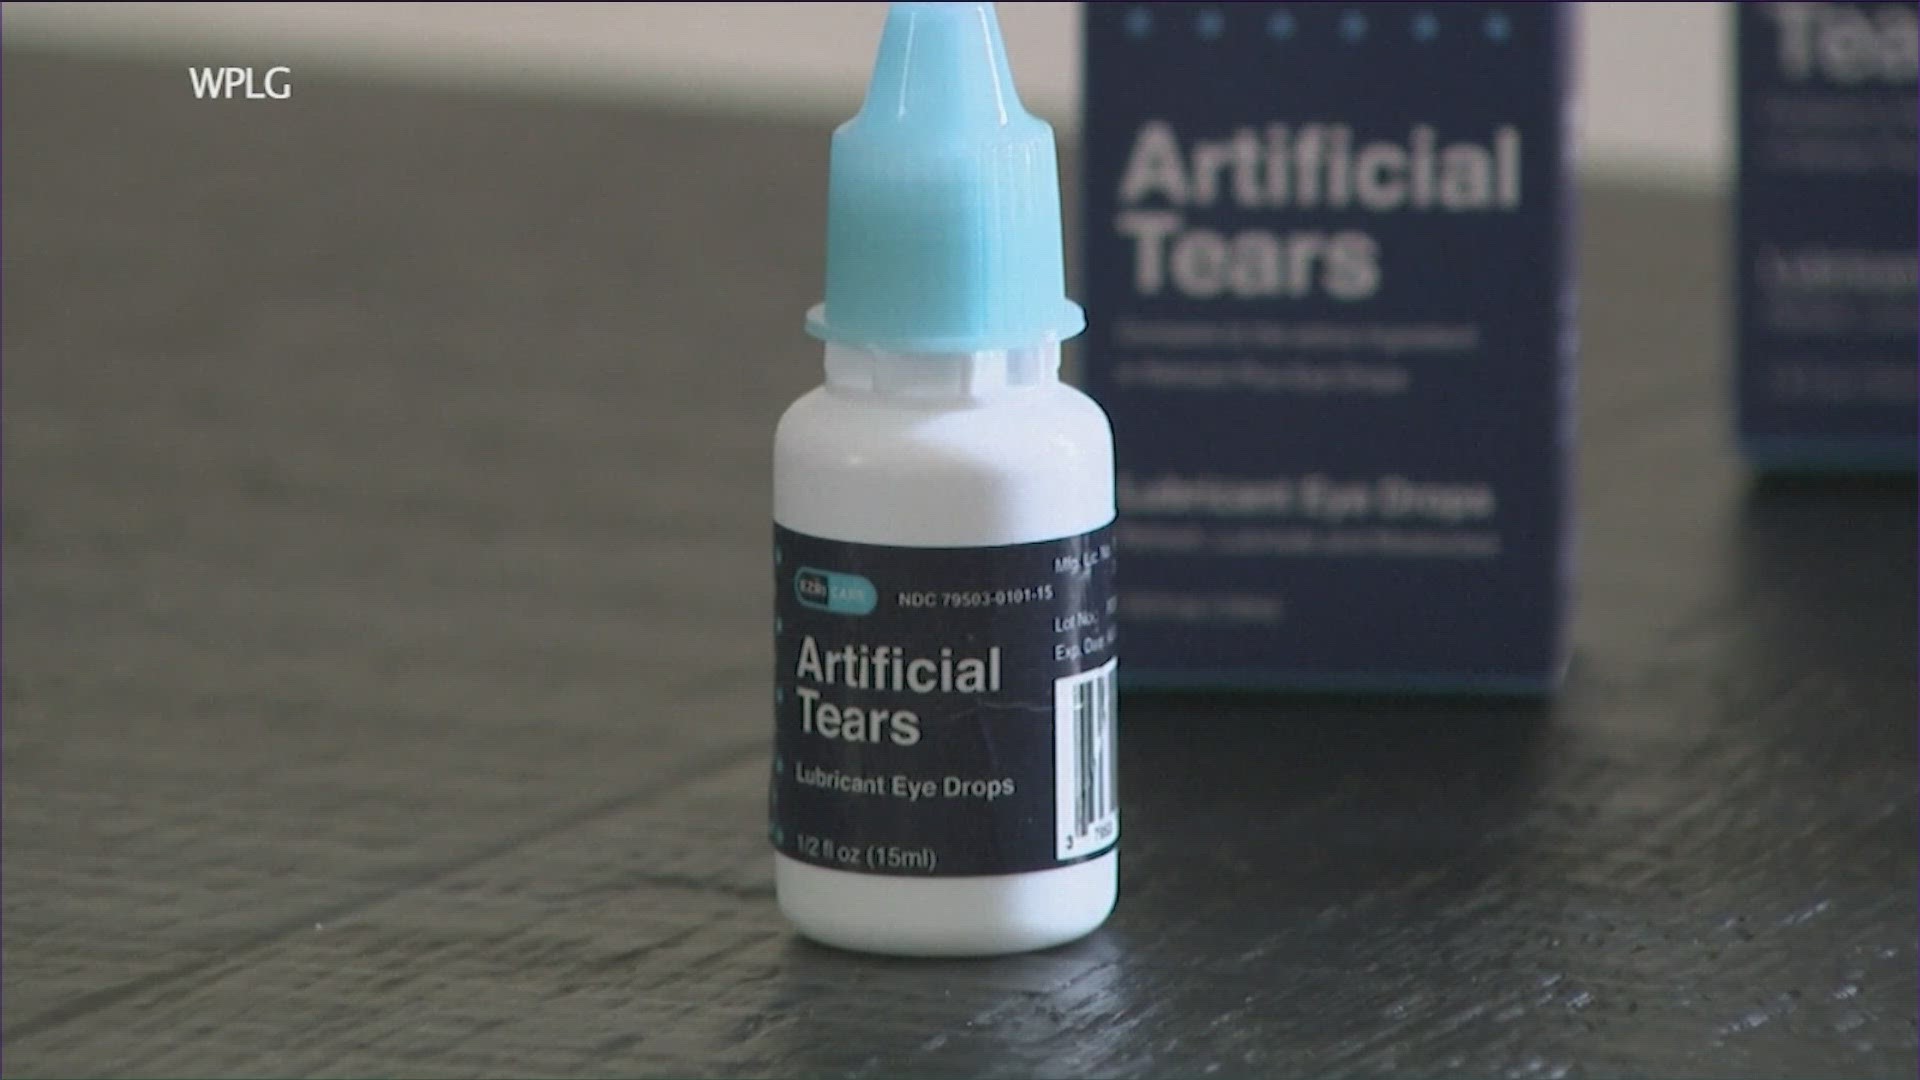 An outbreak caused by contaminated, recalled eye drops has resulted in several deaths nationwide and loss of vision for multiple people.